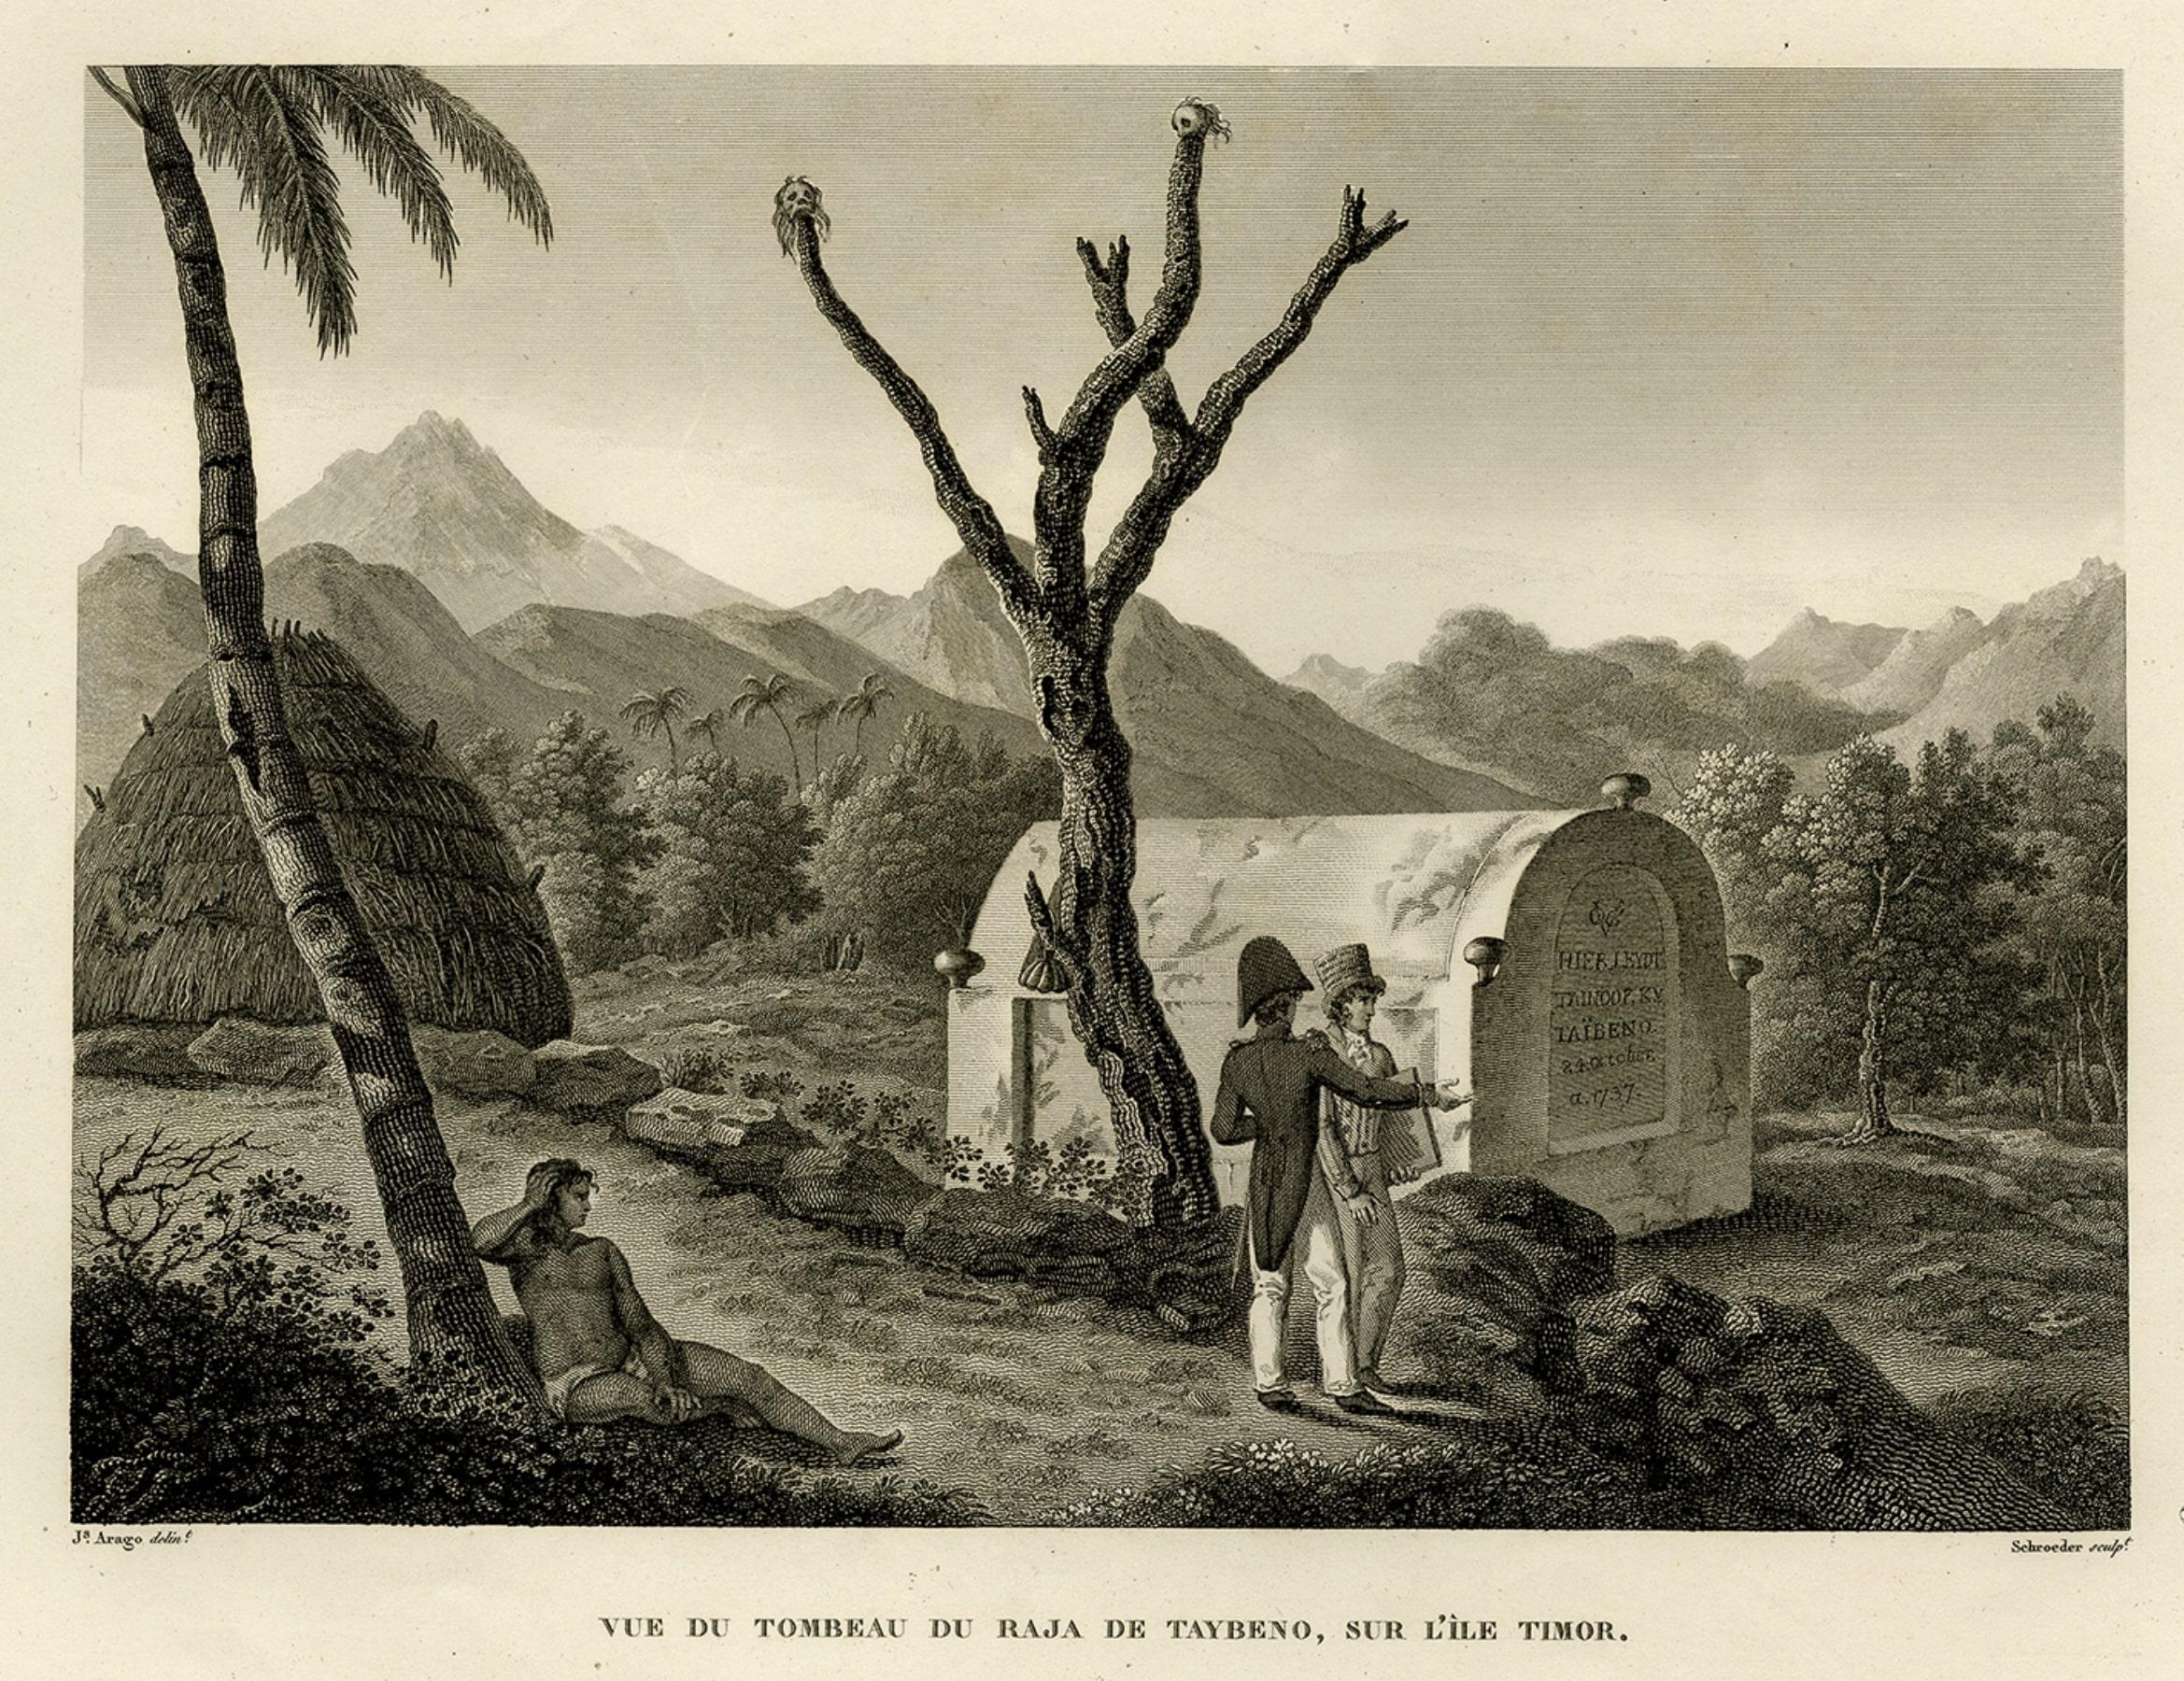 Antique print, titled: 'Vue du Tombeau de Raja de Taybeno, sur l'Ile Timor.' - ('View of the Tomb of the Raja of Taybeno on the island Timor'). 

View of the tomb, adorned with the VOC (Dutch East Indies Company) logo. Two Europeans stand beside the